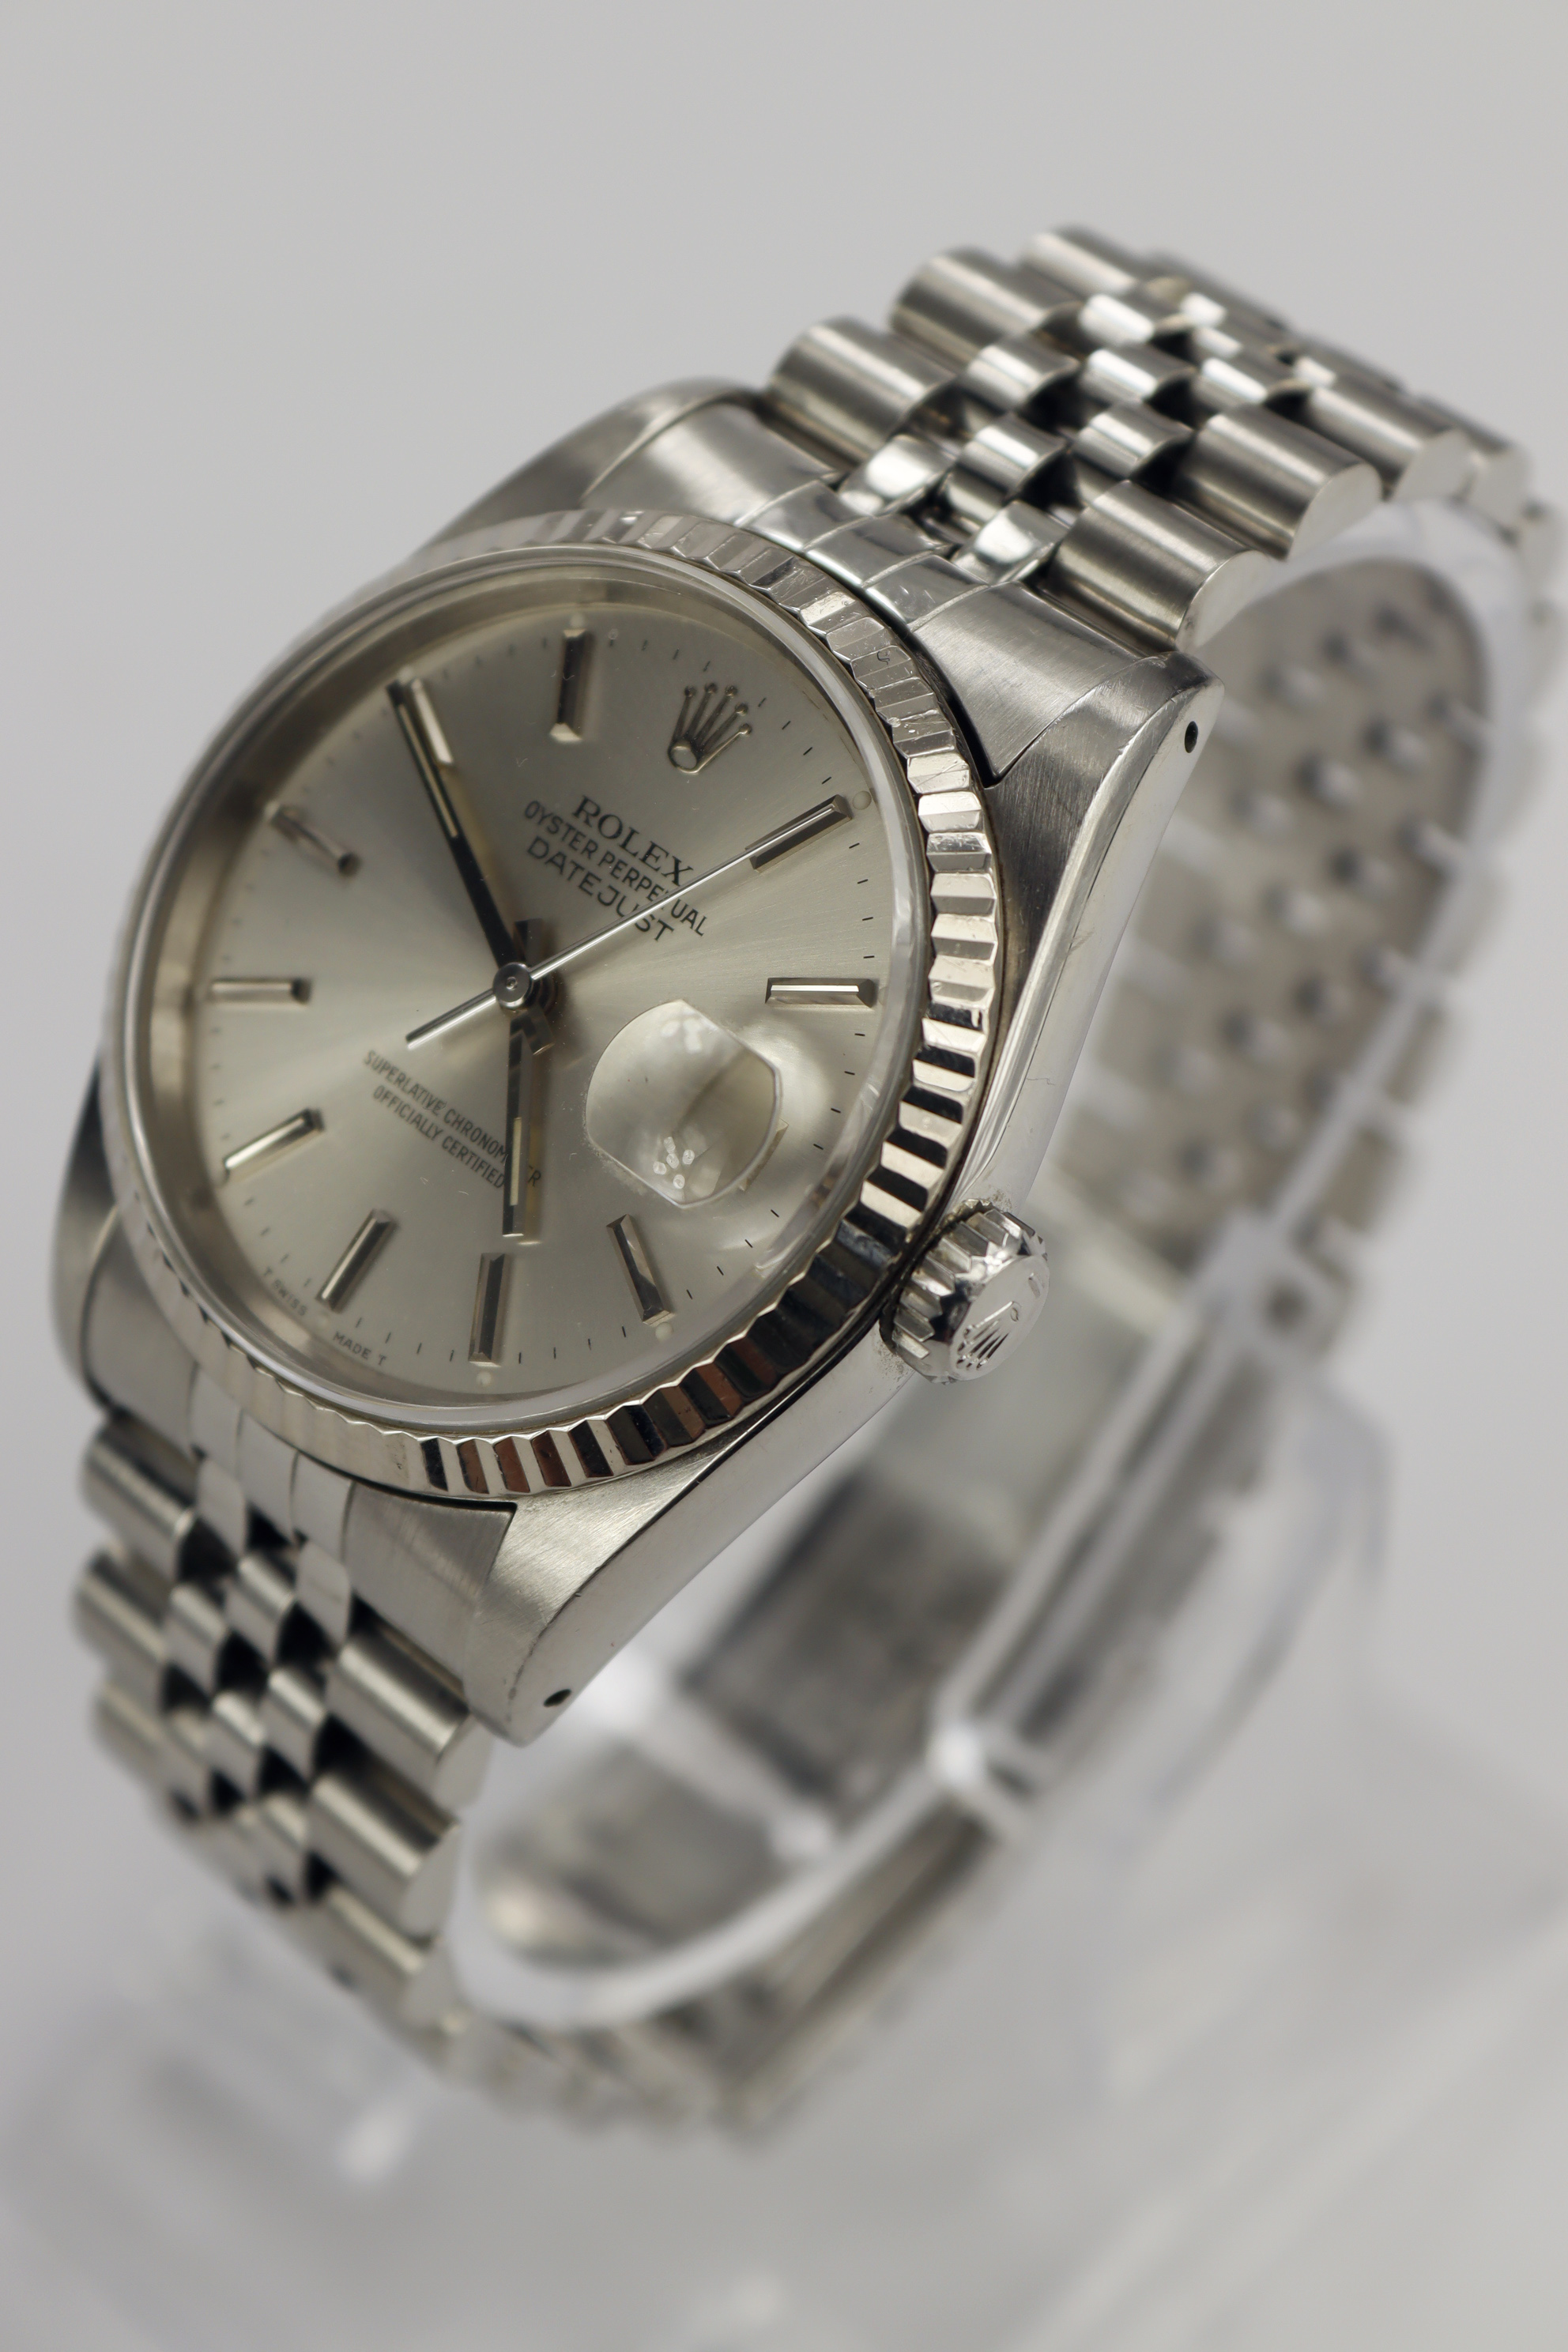 Gents Stainless steel cased Rolex Oyster Datejust wristwatch. Ref 16234. Circa 1990/91. On a - Image 3 of 3